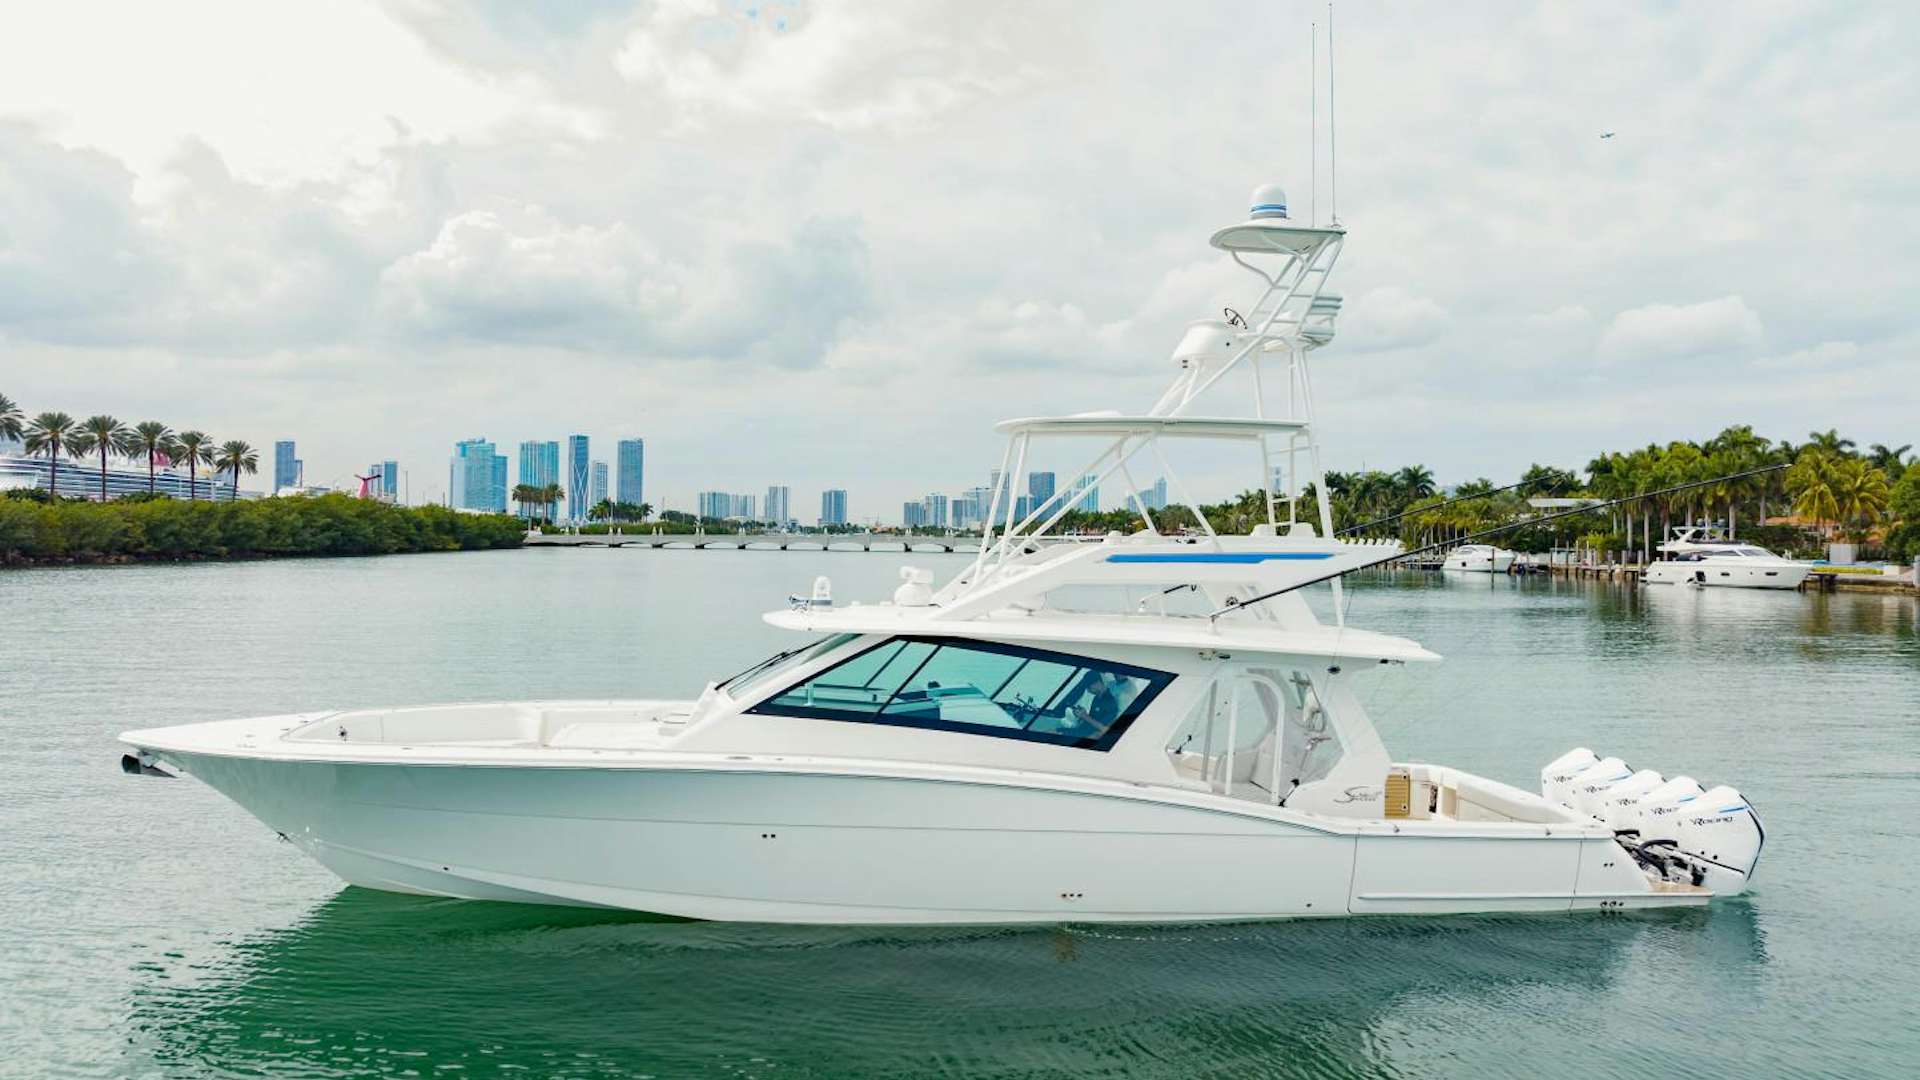 The coop
Yacht for Sale